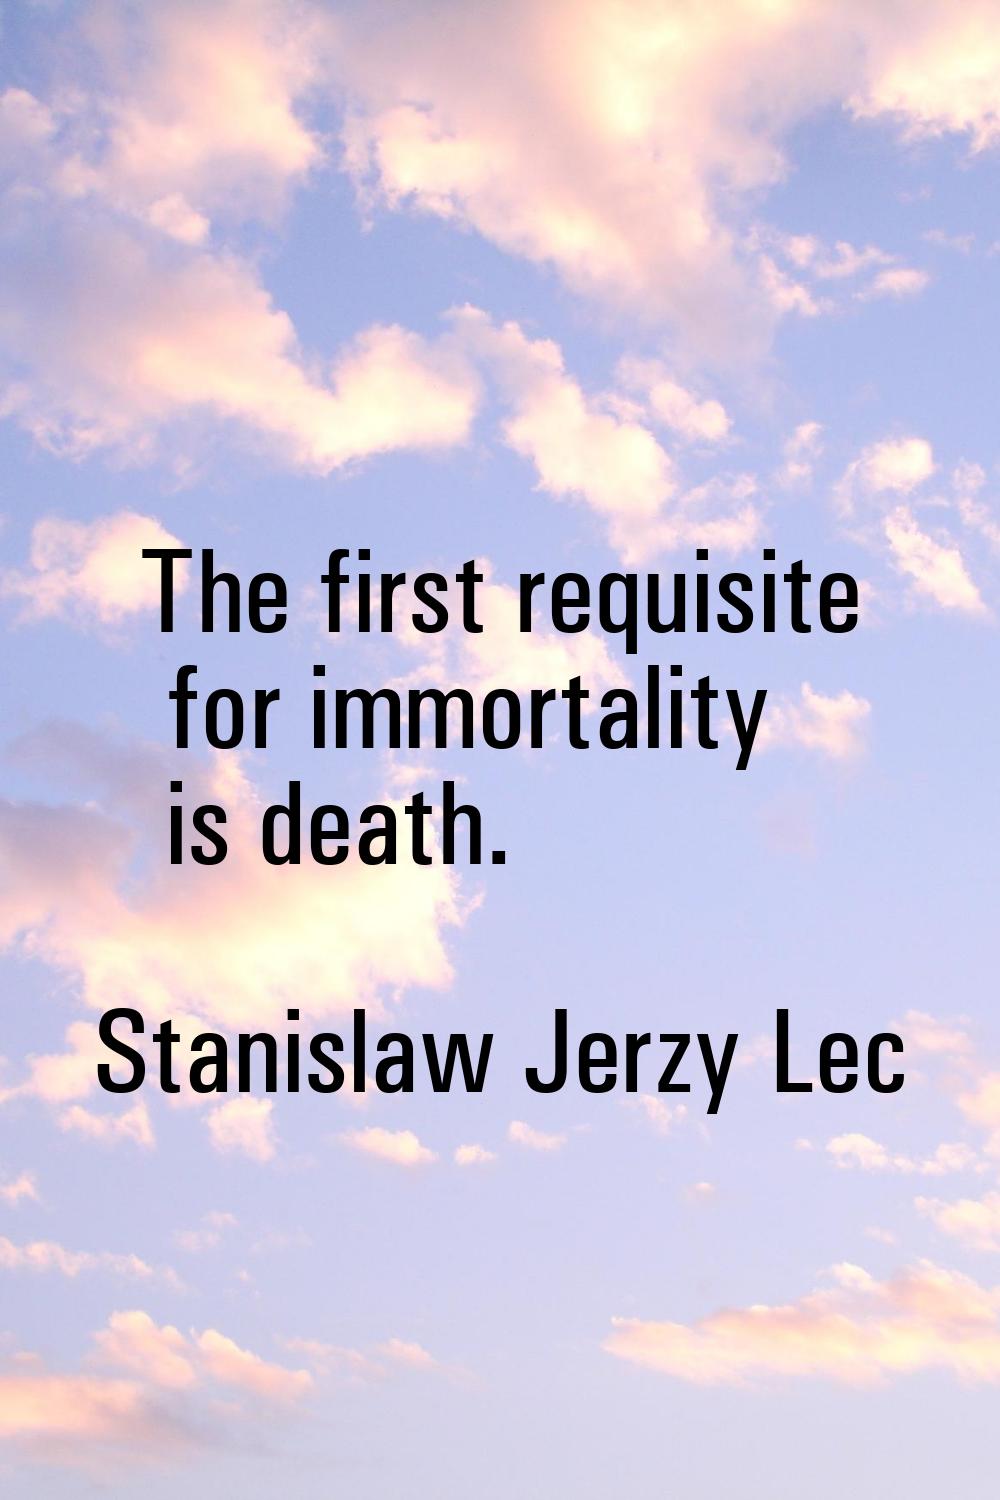 The first requisite for immortality is death.